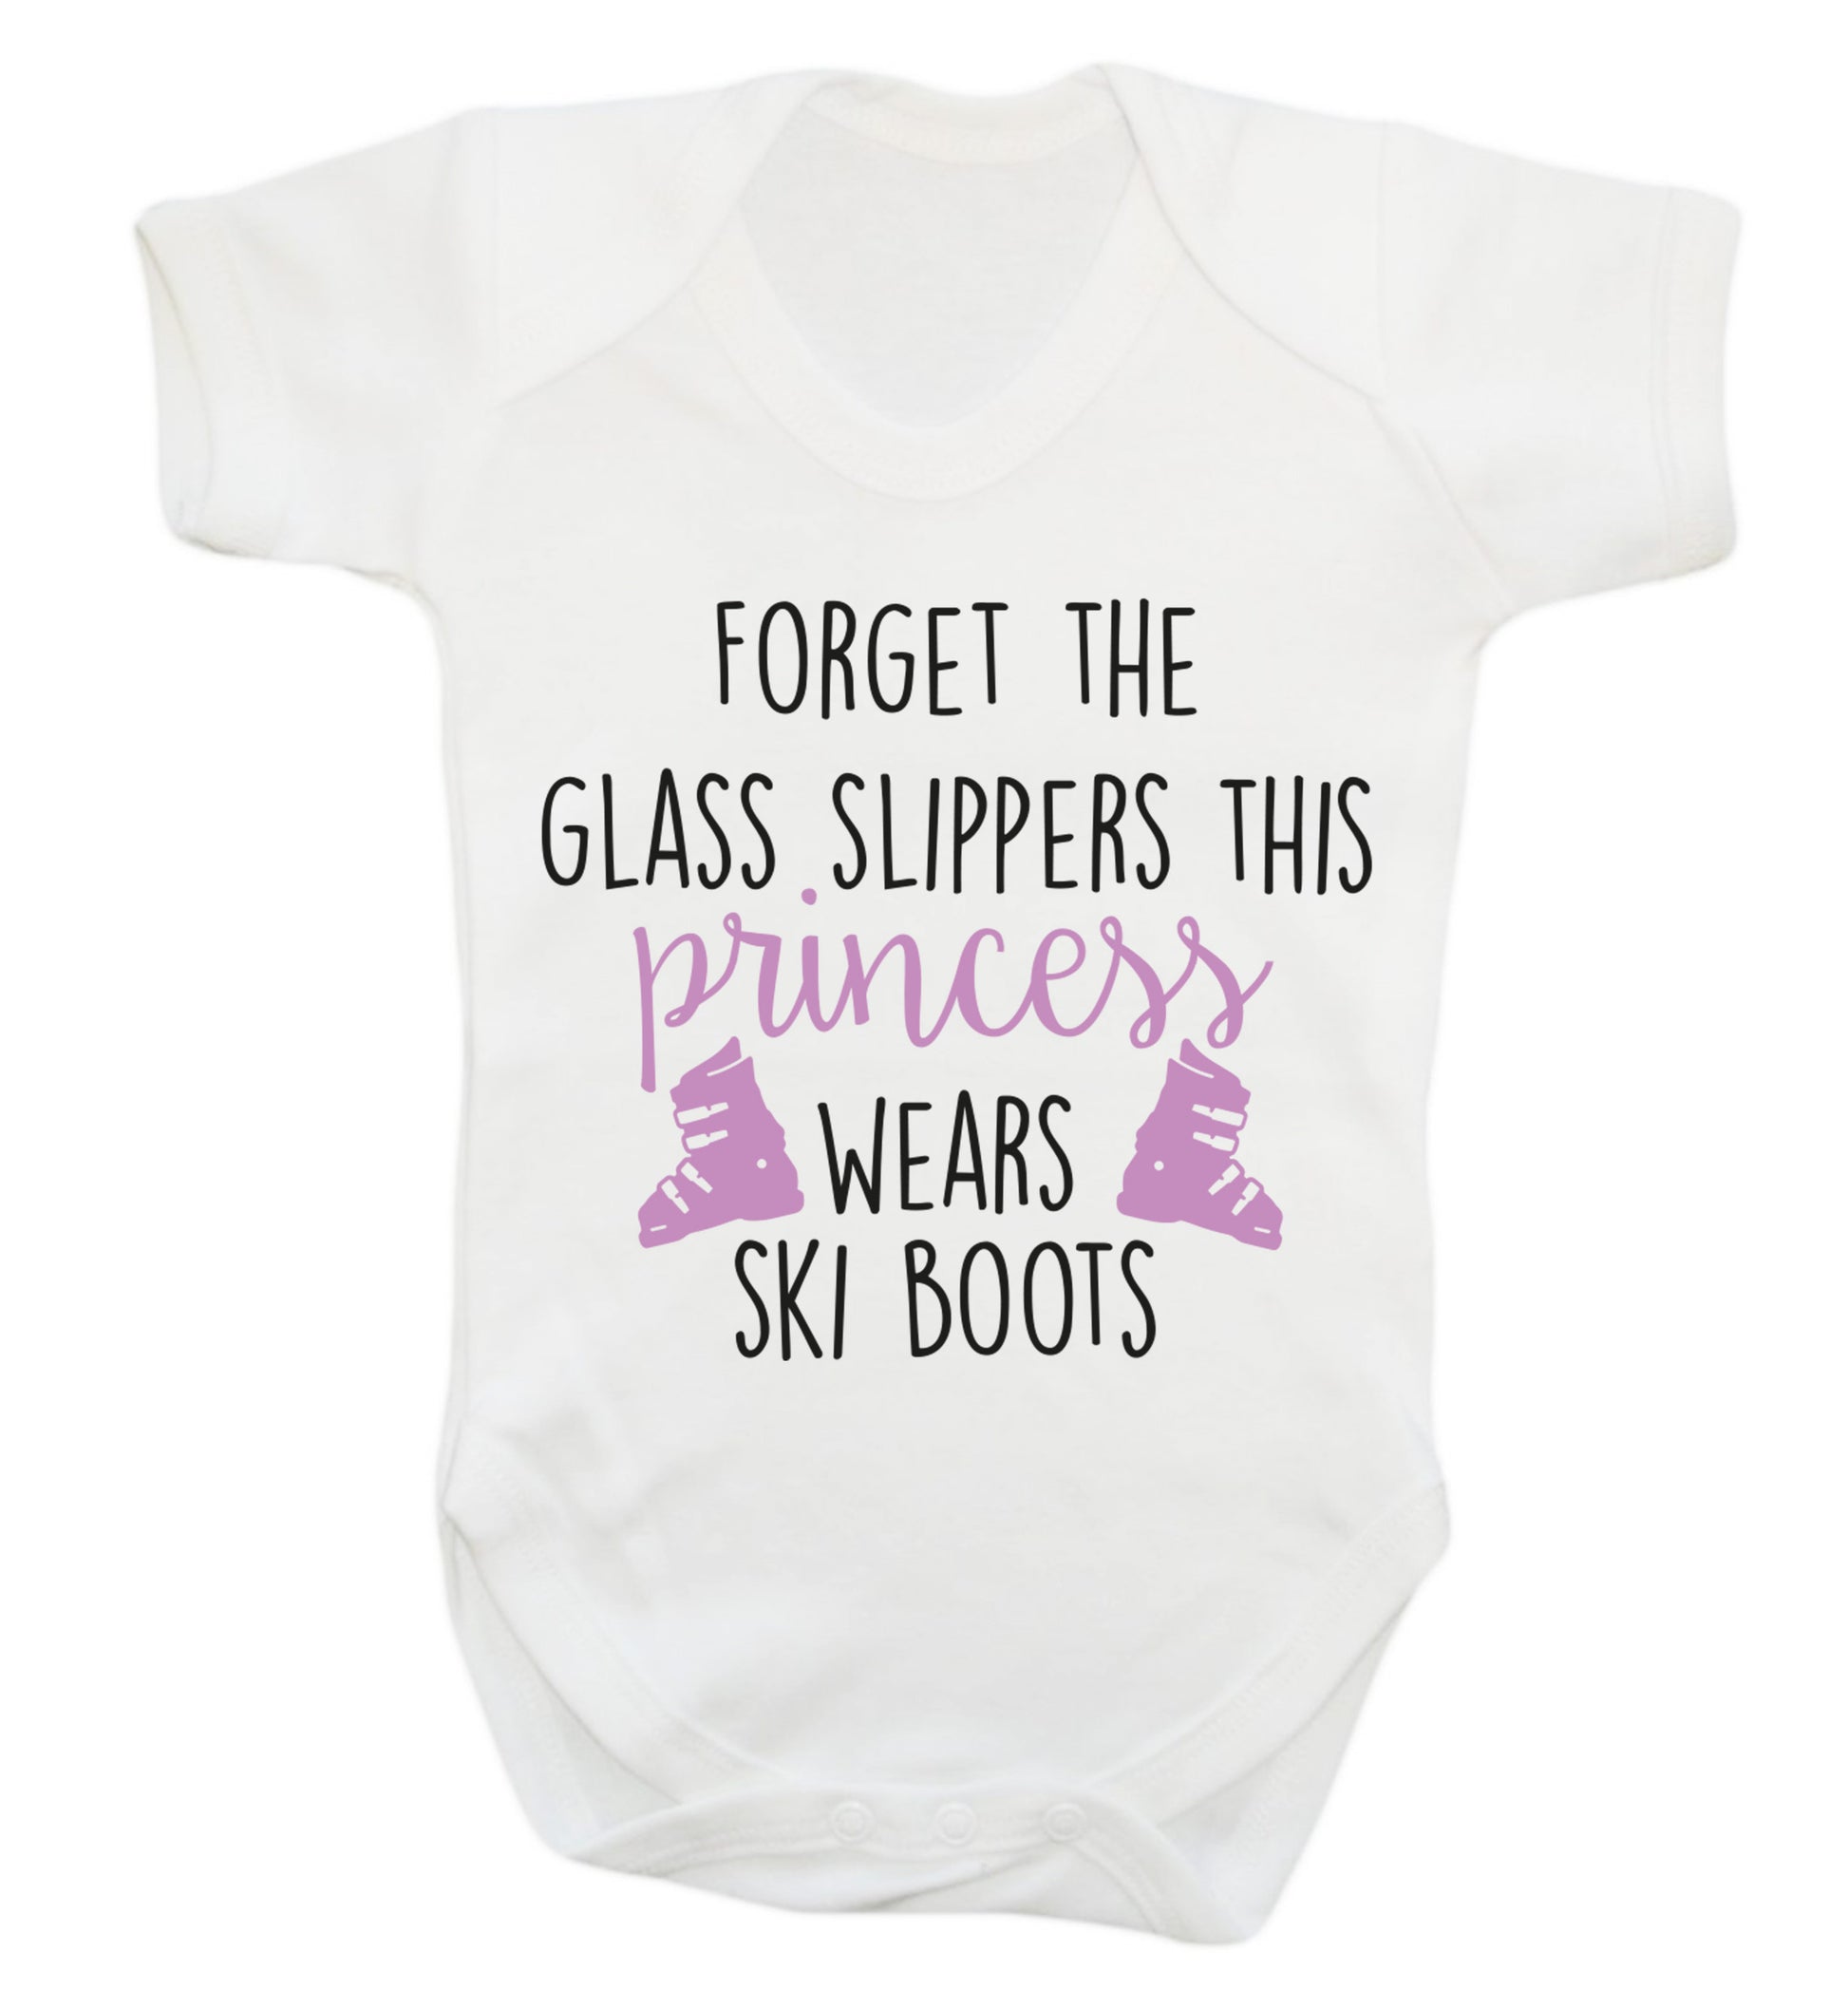 Forget the glass slippers this princess wears ski boots Baby Vest white 18-24 months